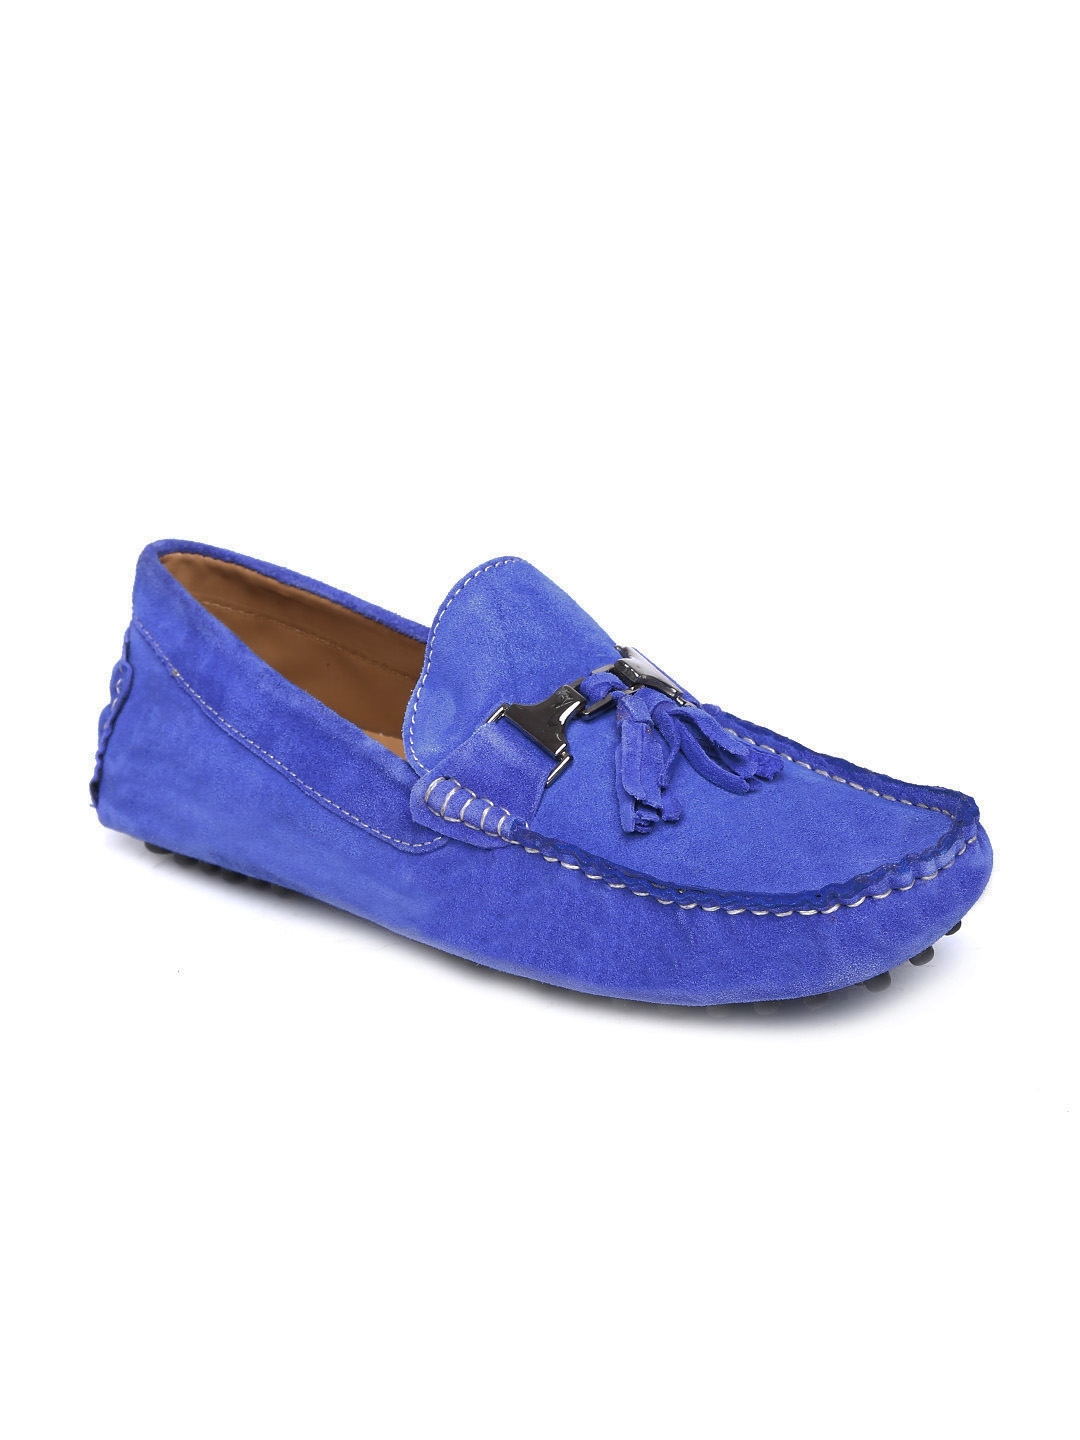 Buy Mast & Harbour Men Royal Blue Suede Loafers - Casual Shoes for Men ...